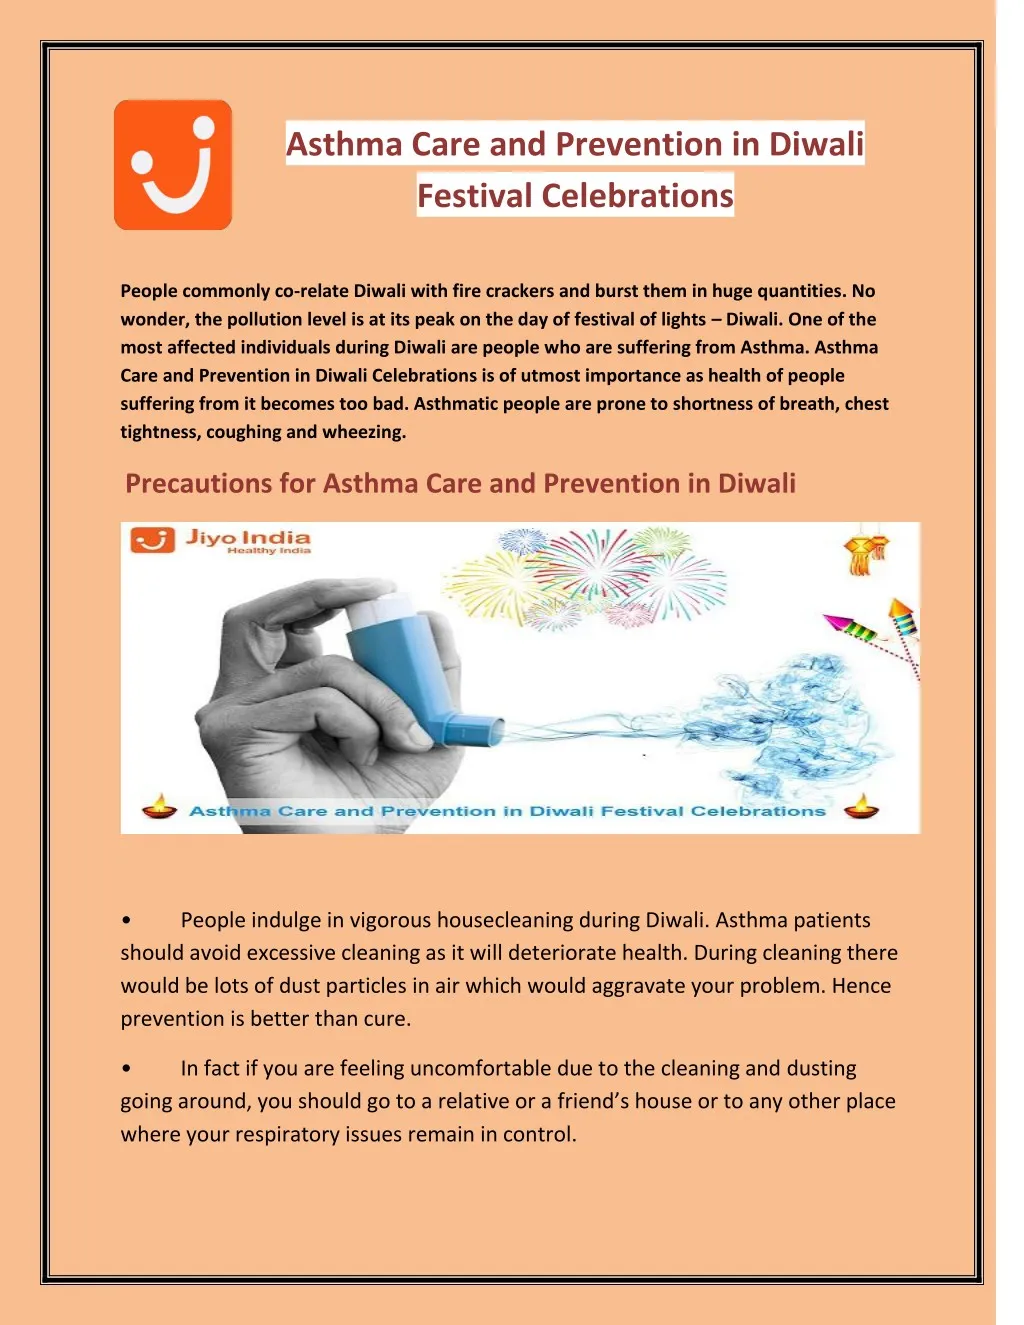 asthma care and prevention in diwali festival